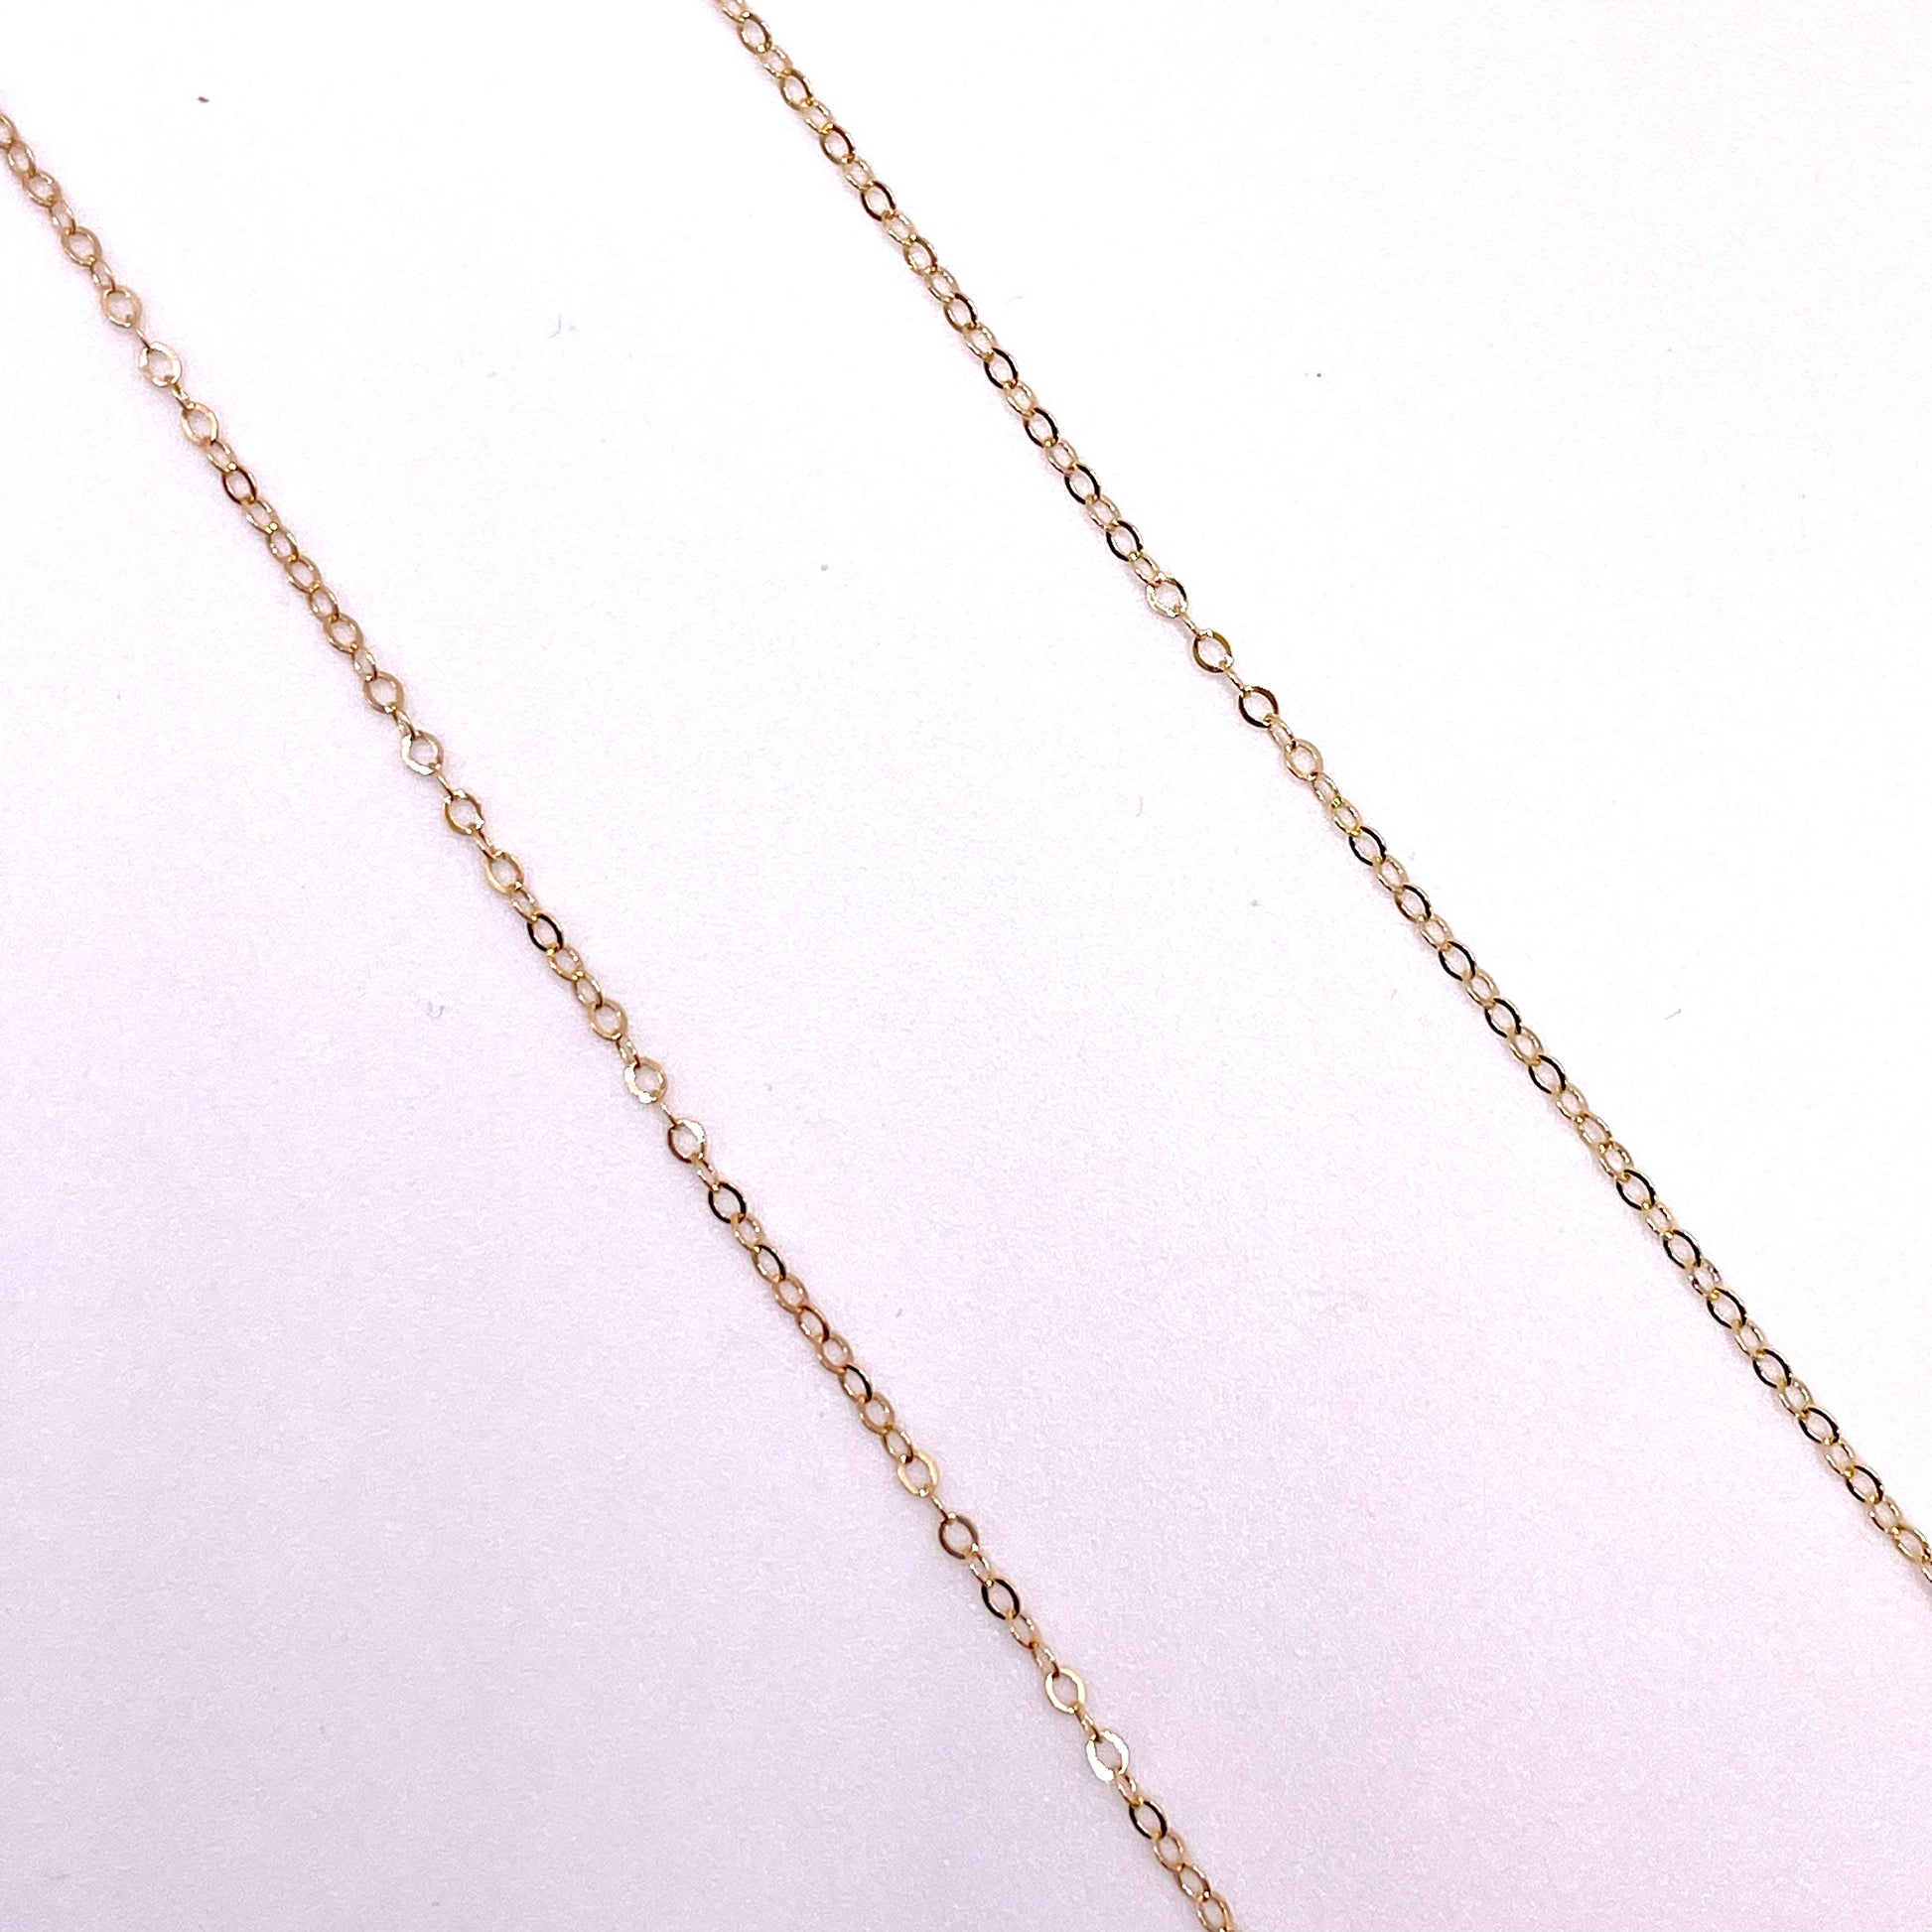 14k gold filled flat cable chain in white background.